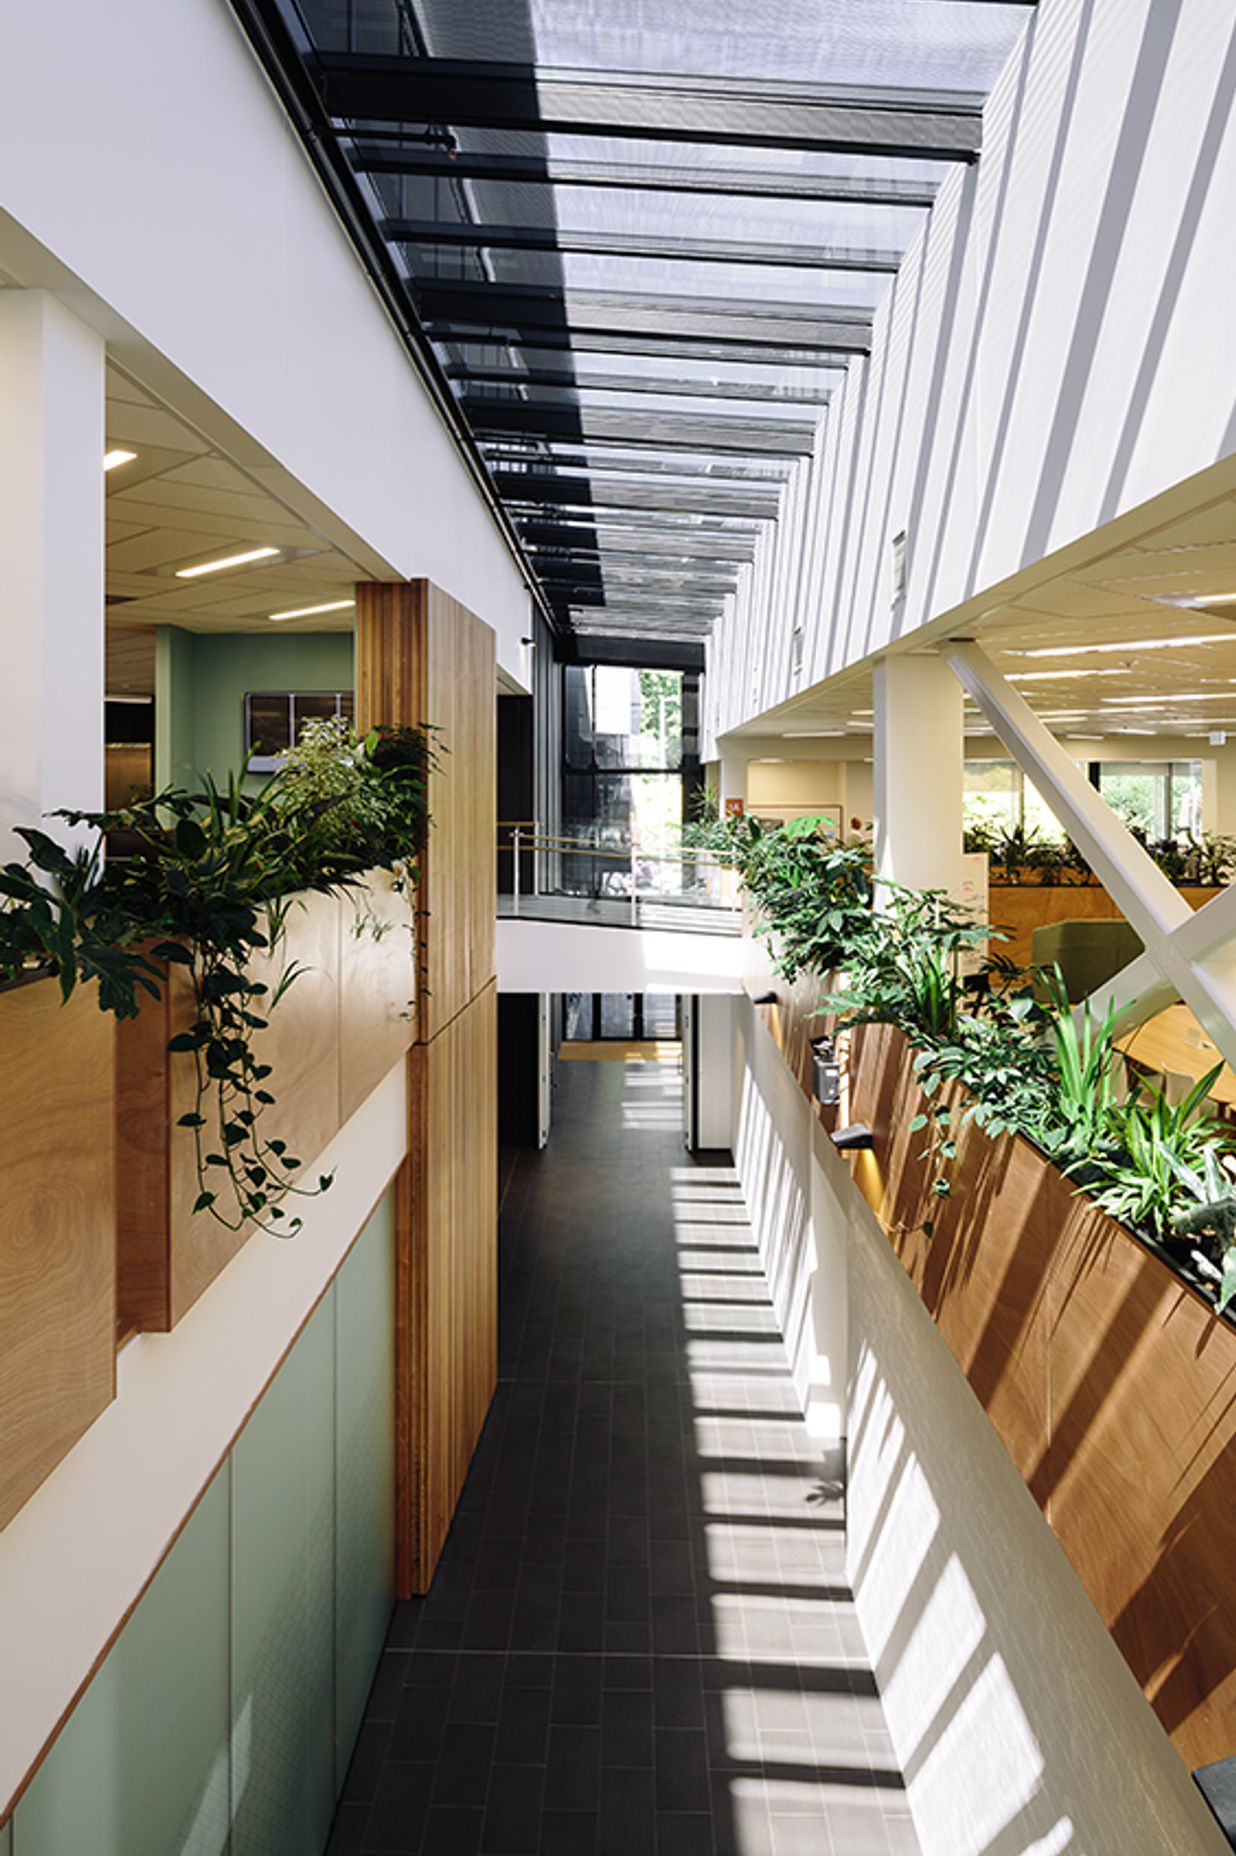 A linear atrium, slicing through the old and the new building floor plates, creates connections between floors and maximises the penetration of natural light.